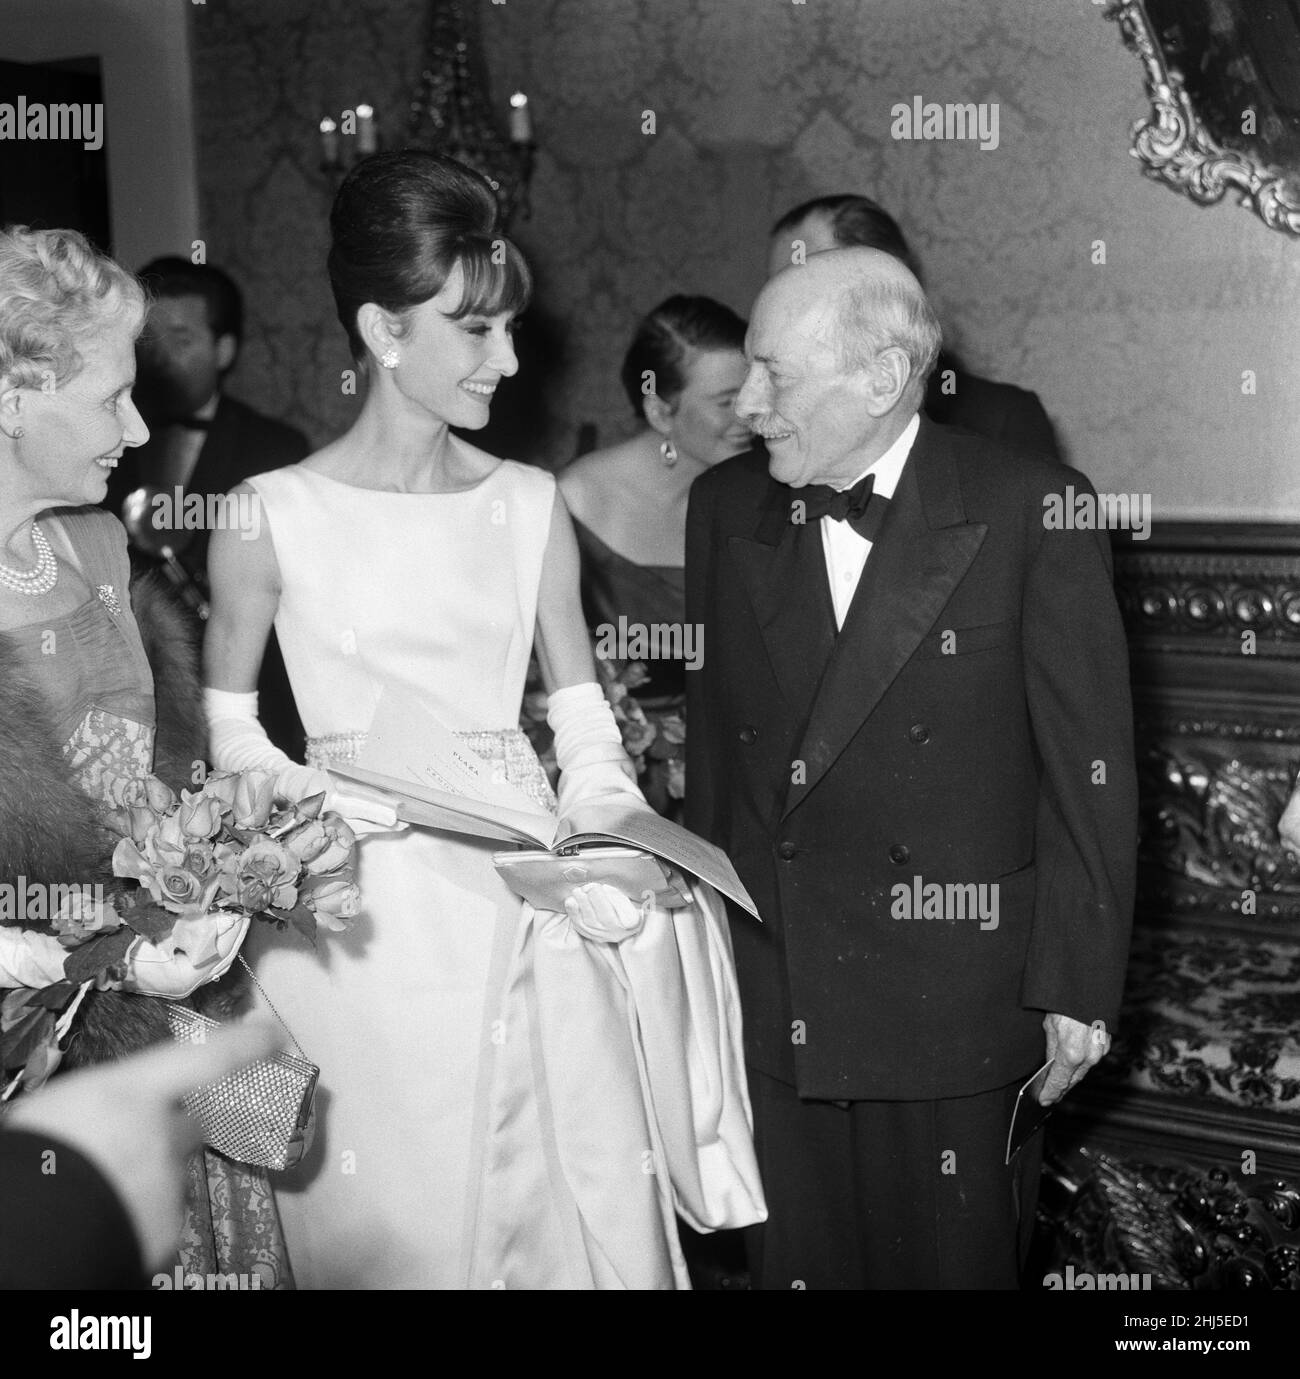 Actress Audrey Hepburn pictured with Earl and Countess Attlee at the London premiere of her latest movie 'Breakfast At Tiffany's' at the Plaza Theatre. 19th October 1961. Stock Photo